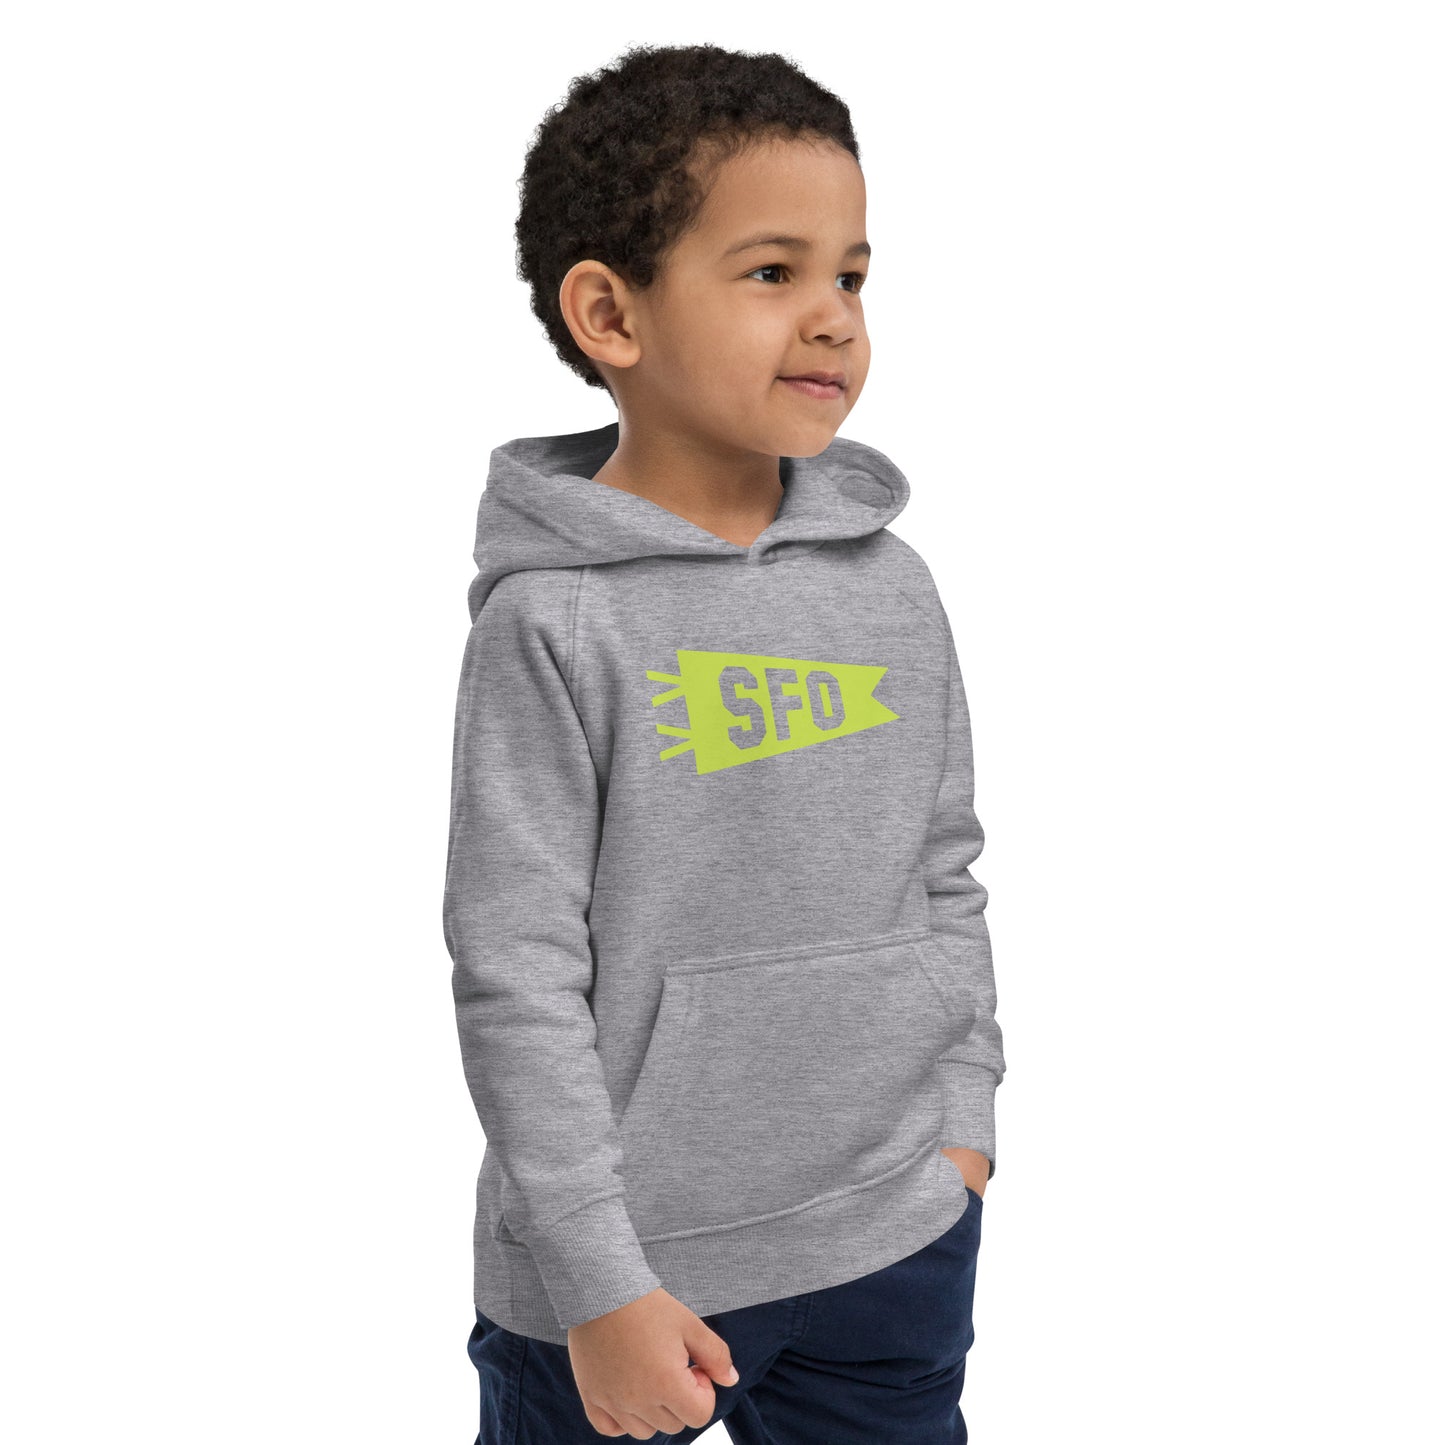 Kid's Sustainable Hoodie - Green Graphic • SFO San Francisco • YHM Designs - Image 13